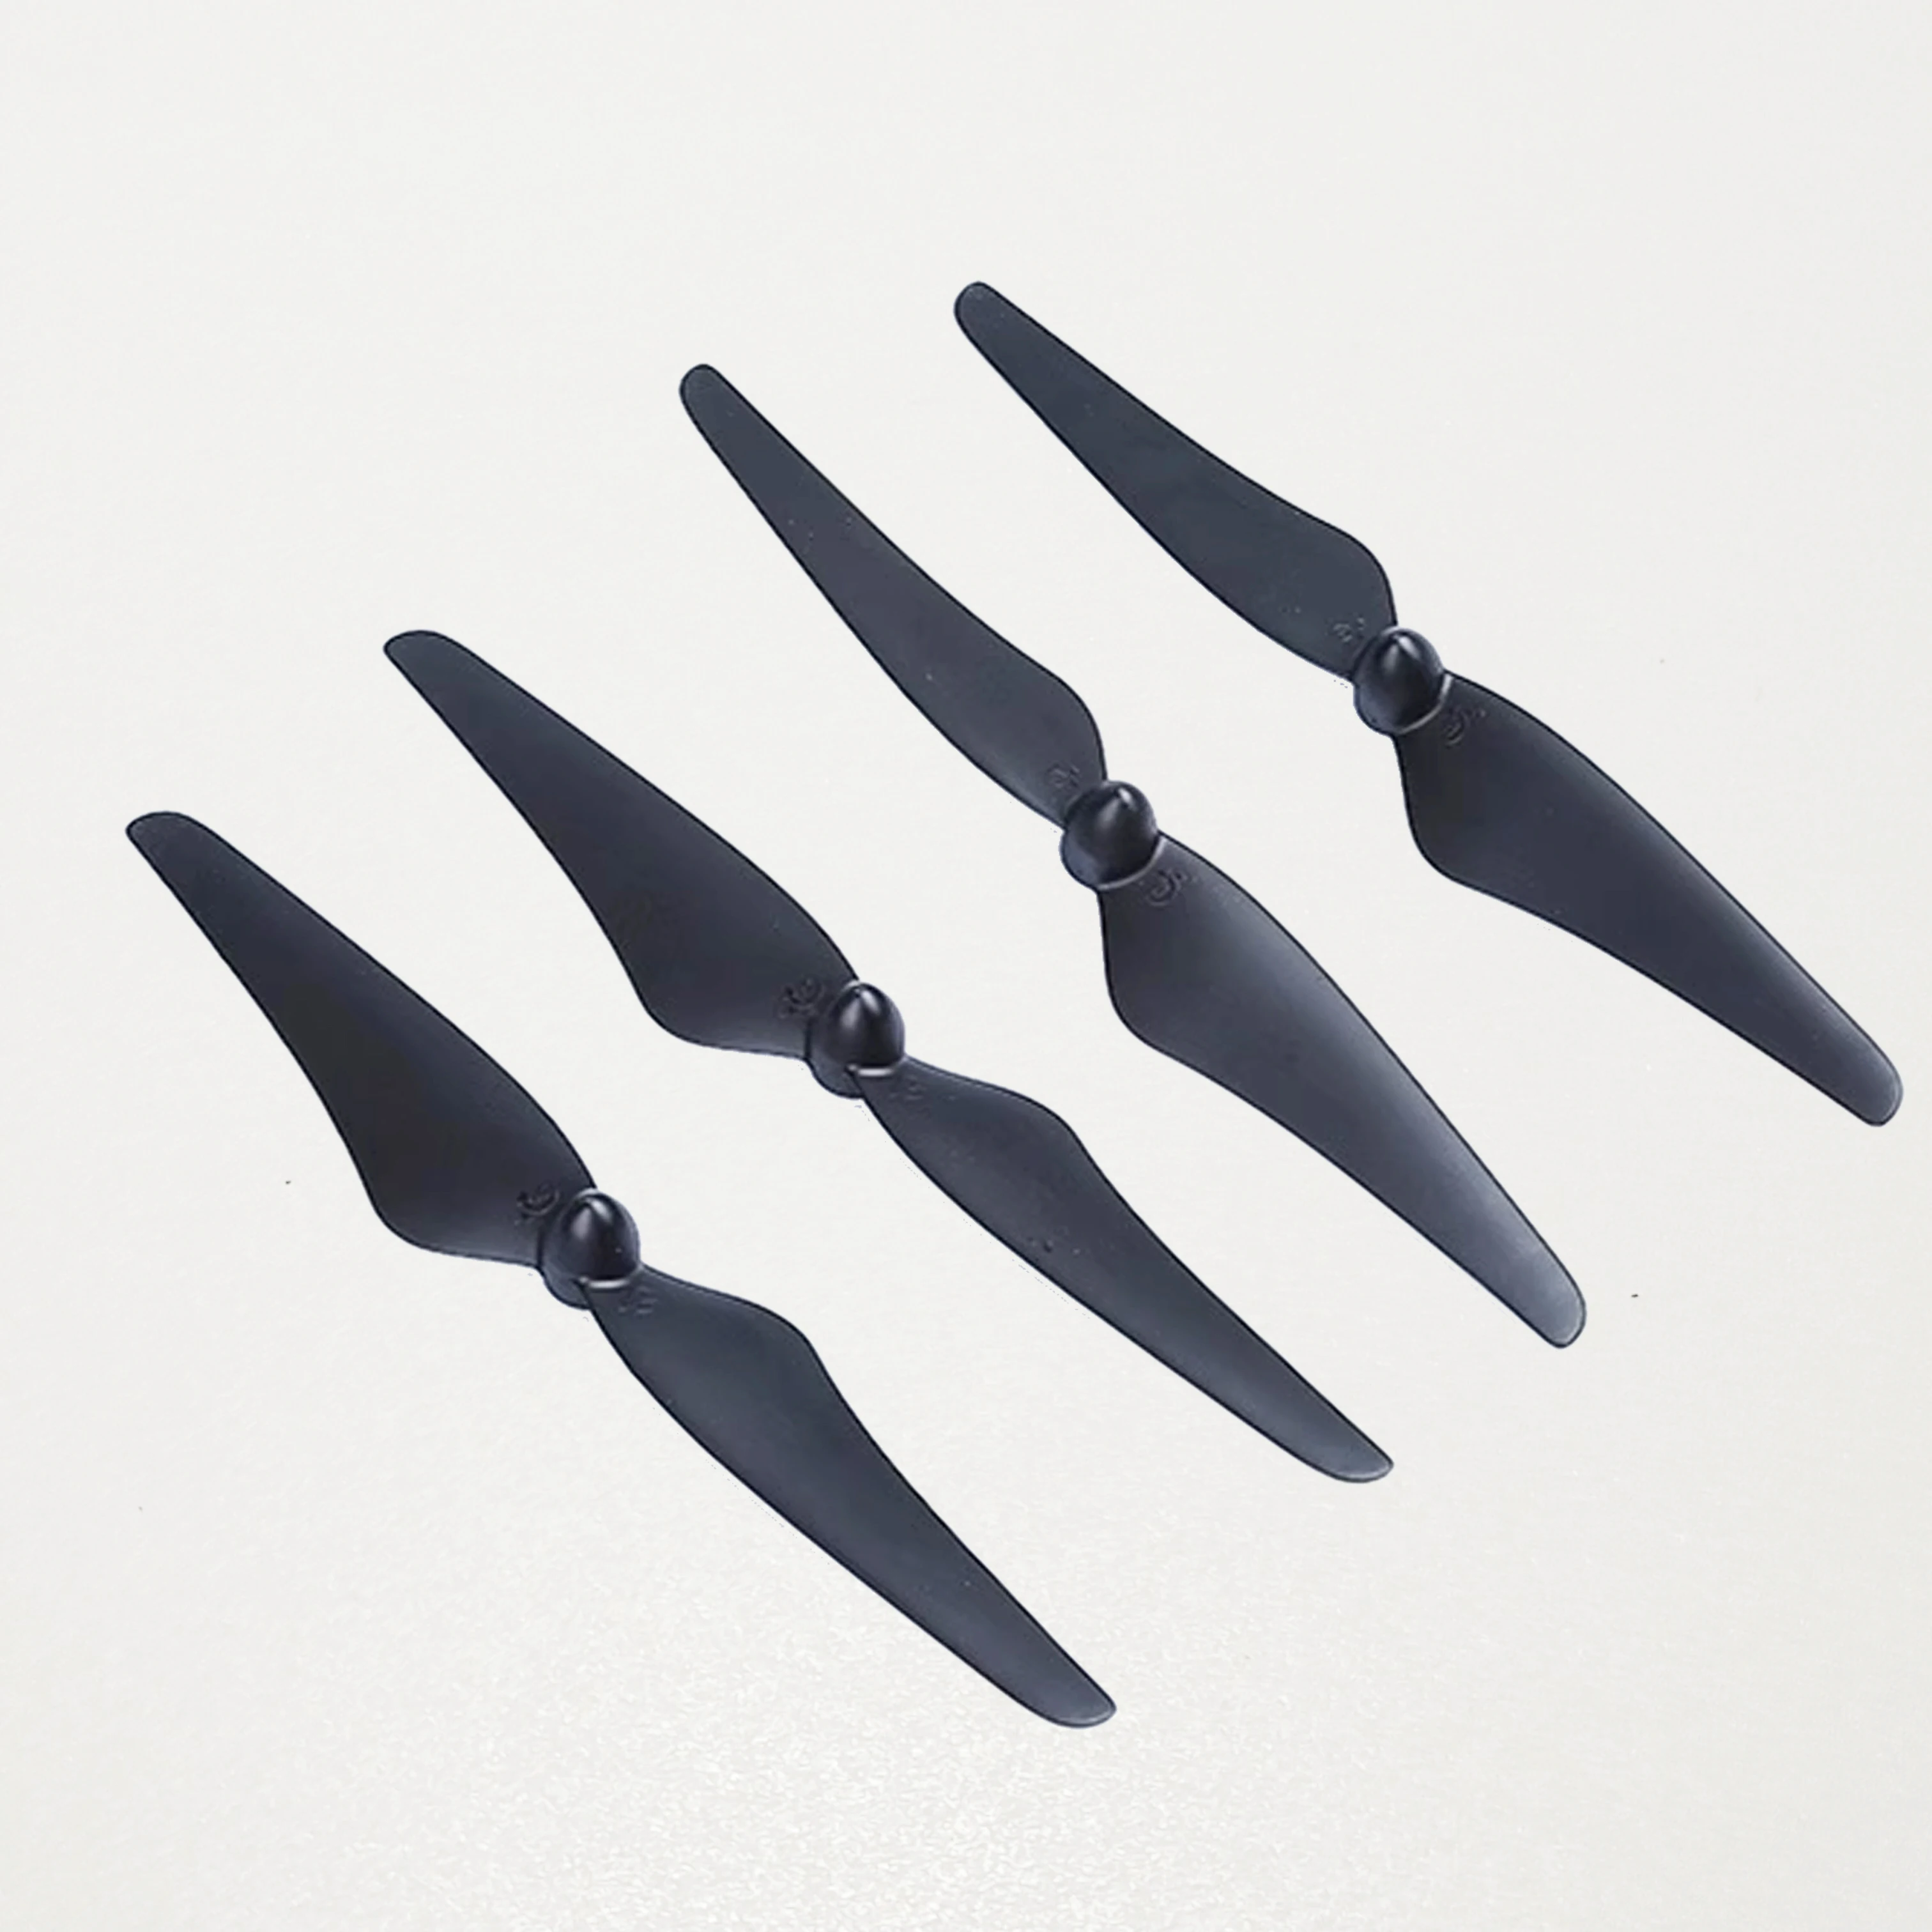 

4PCS Original Propeller Props for Hubsan H109S RC Drone Quadcopter Maple Leaf Blade CW CCW Wing Replacement Accessory